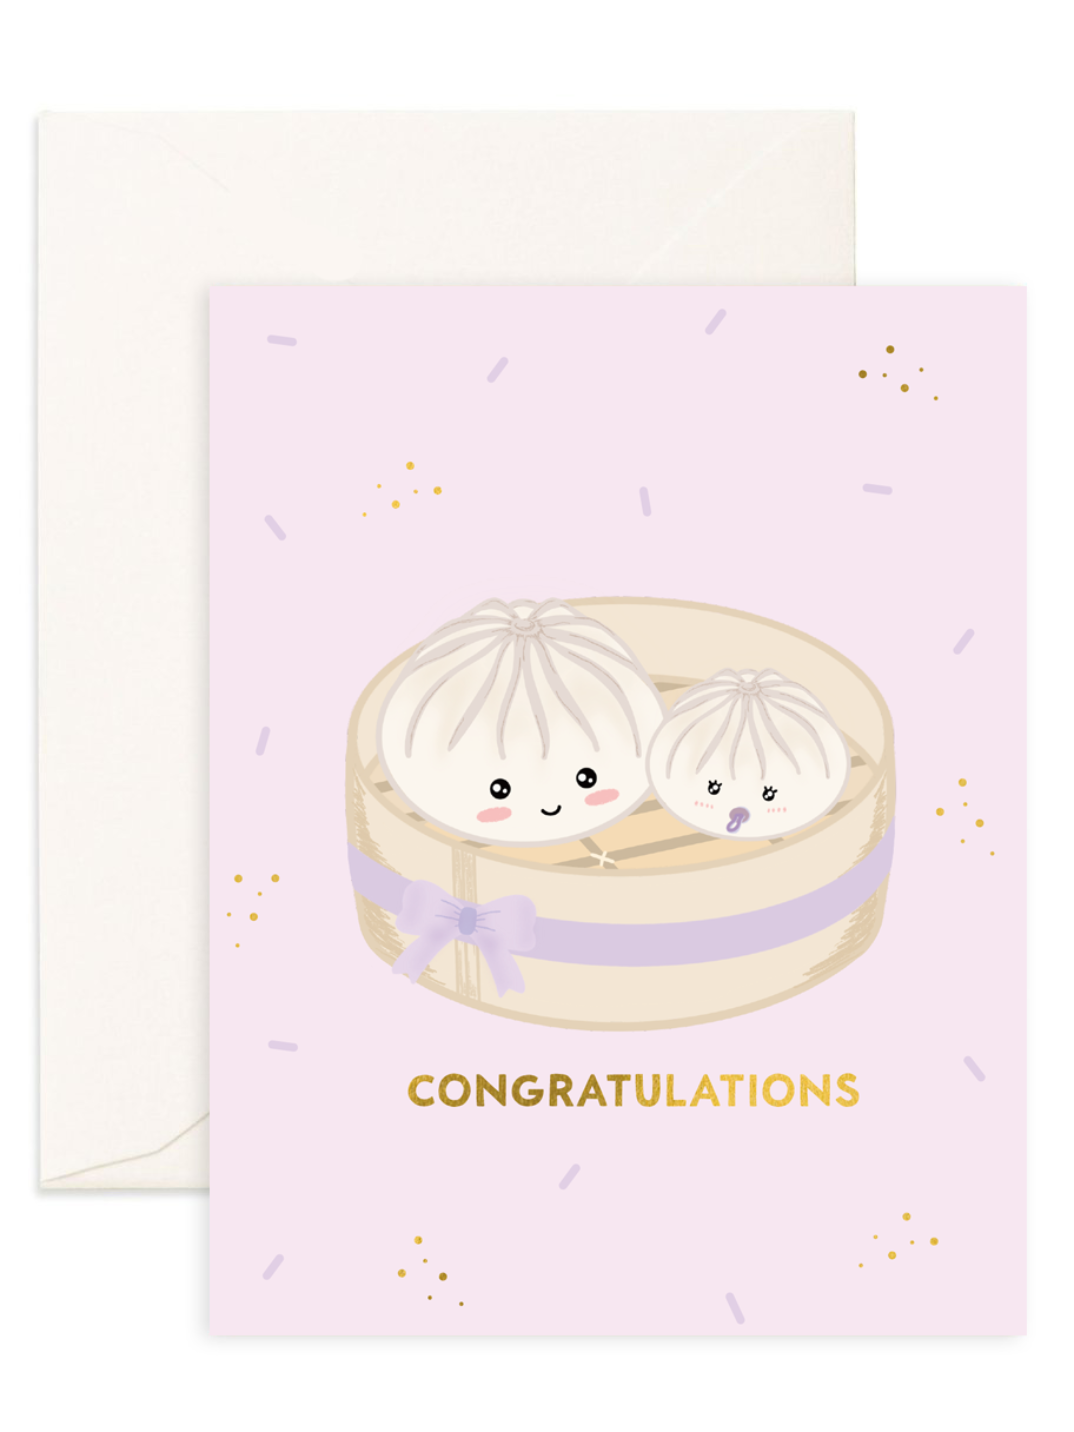 Cute greeting card for new moms, baby showers, or the birth of a new child! Printed on recycled paper and made ethically. Hong Kong-inspired. Shop sustainable eco-friendly gift.